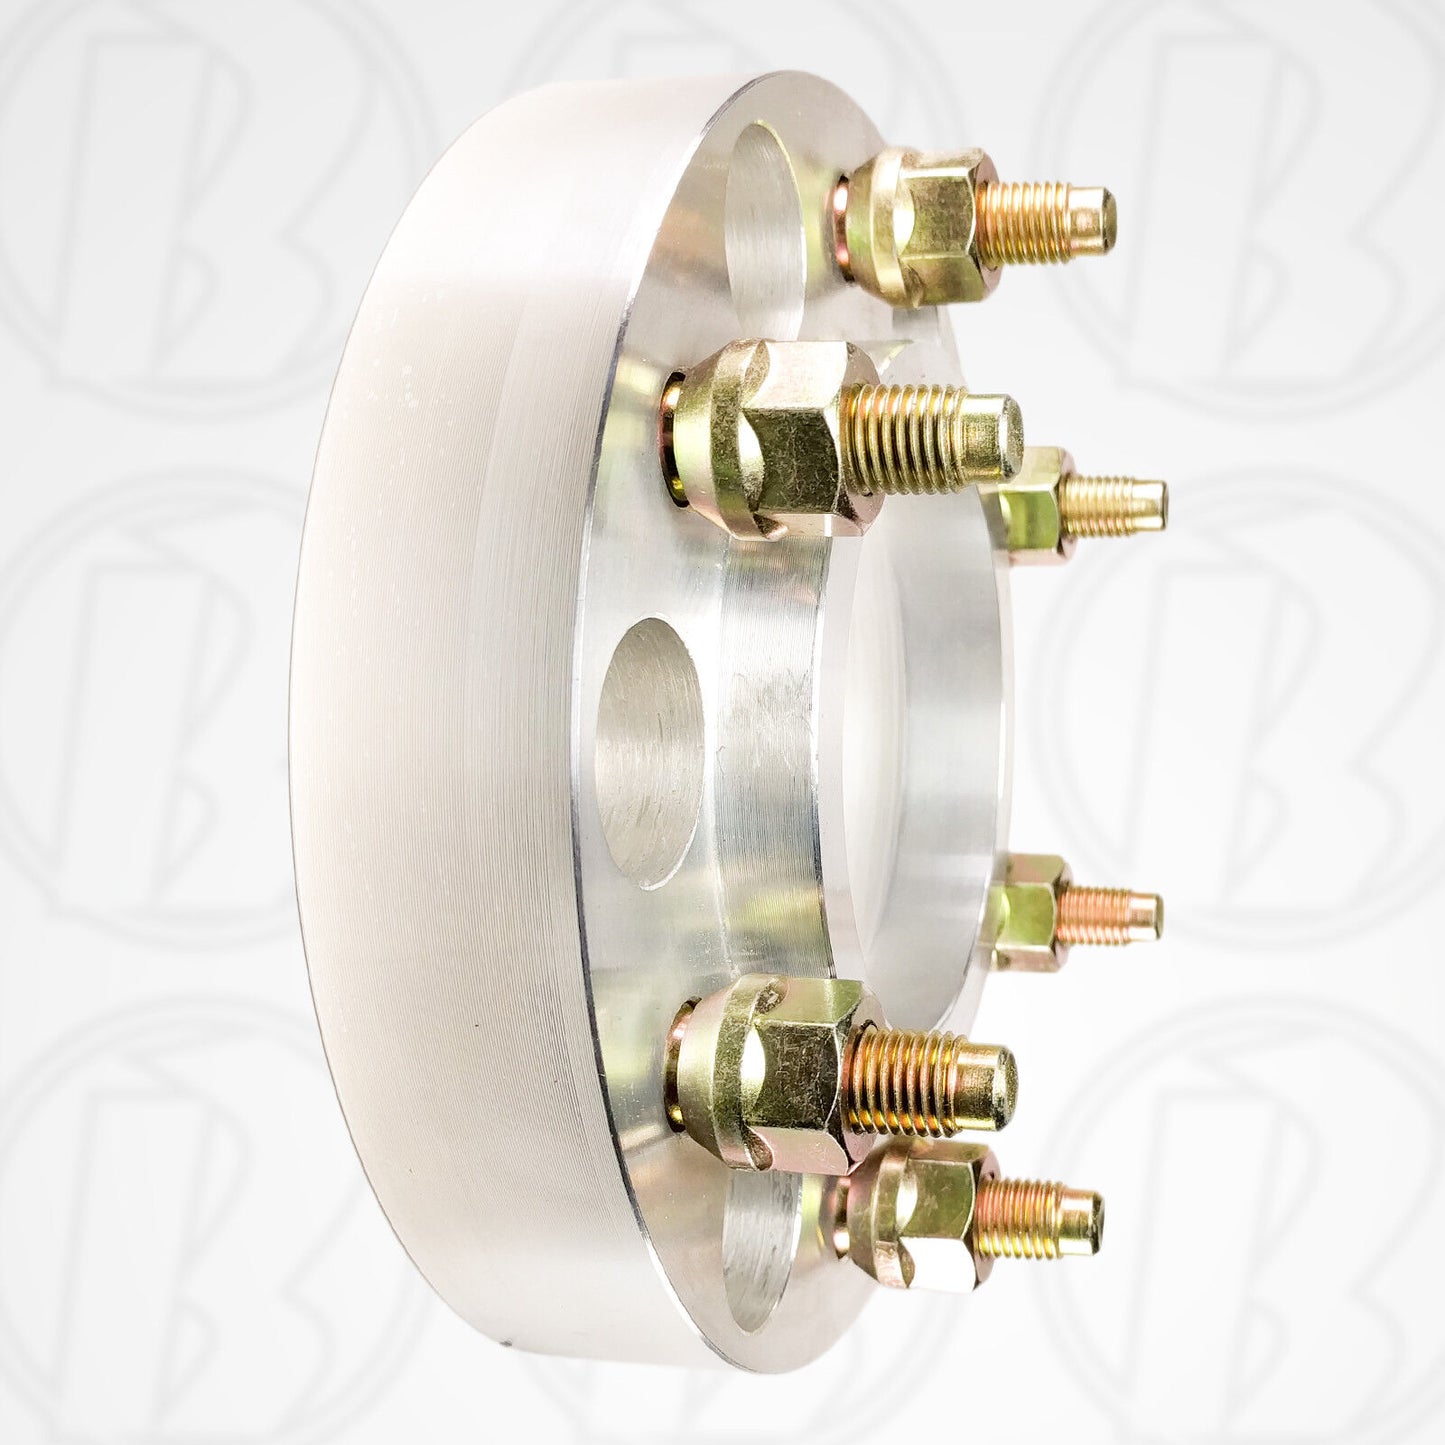 6x5.5" to 6x5.5" Hub Centric Wheel Adapter Big Bore to Small Chevy Colorado, Toyota Tundra Thickness : 1.5" - 3.0"